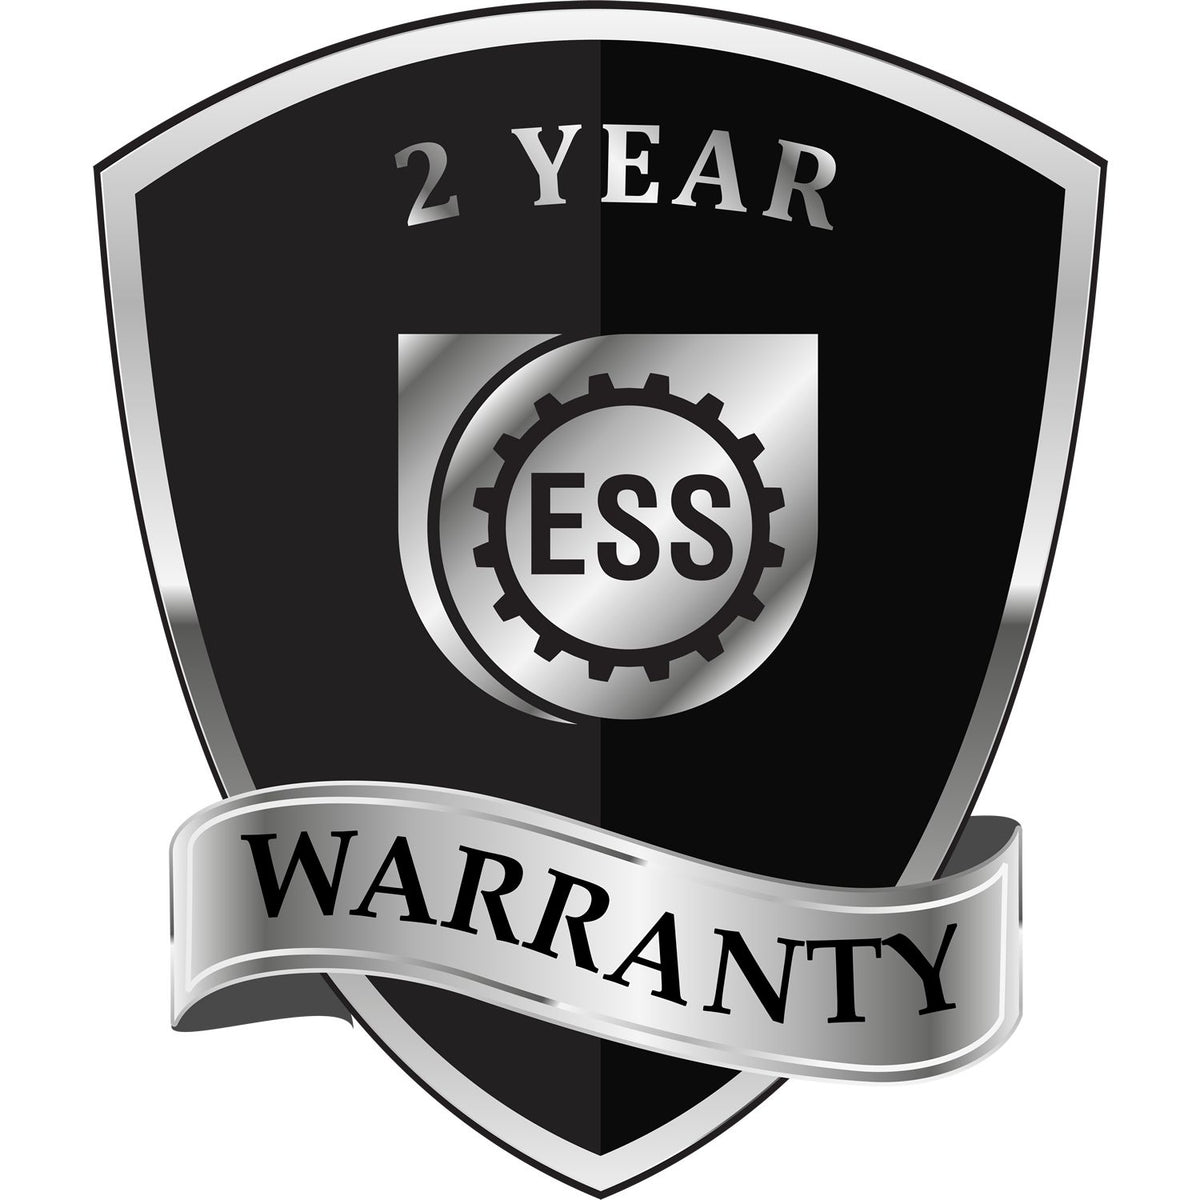 A black and silver badge or emblem showing warranty information for the Gift Kentucky Land Surveyor Seal